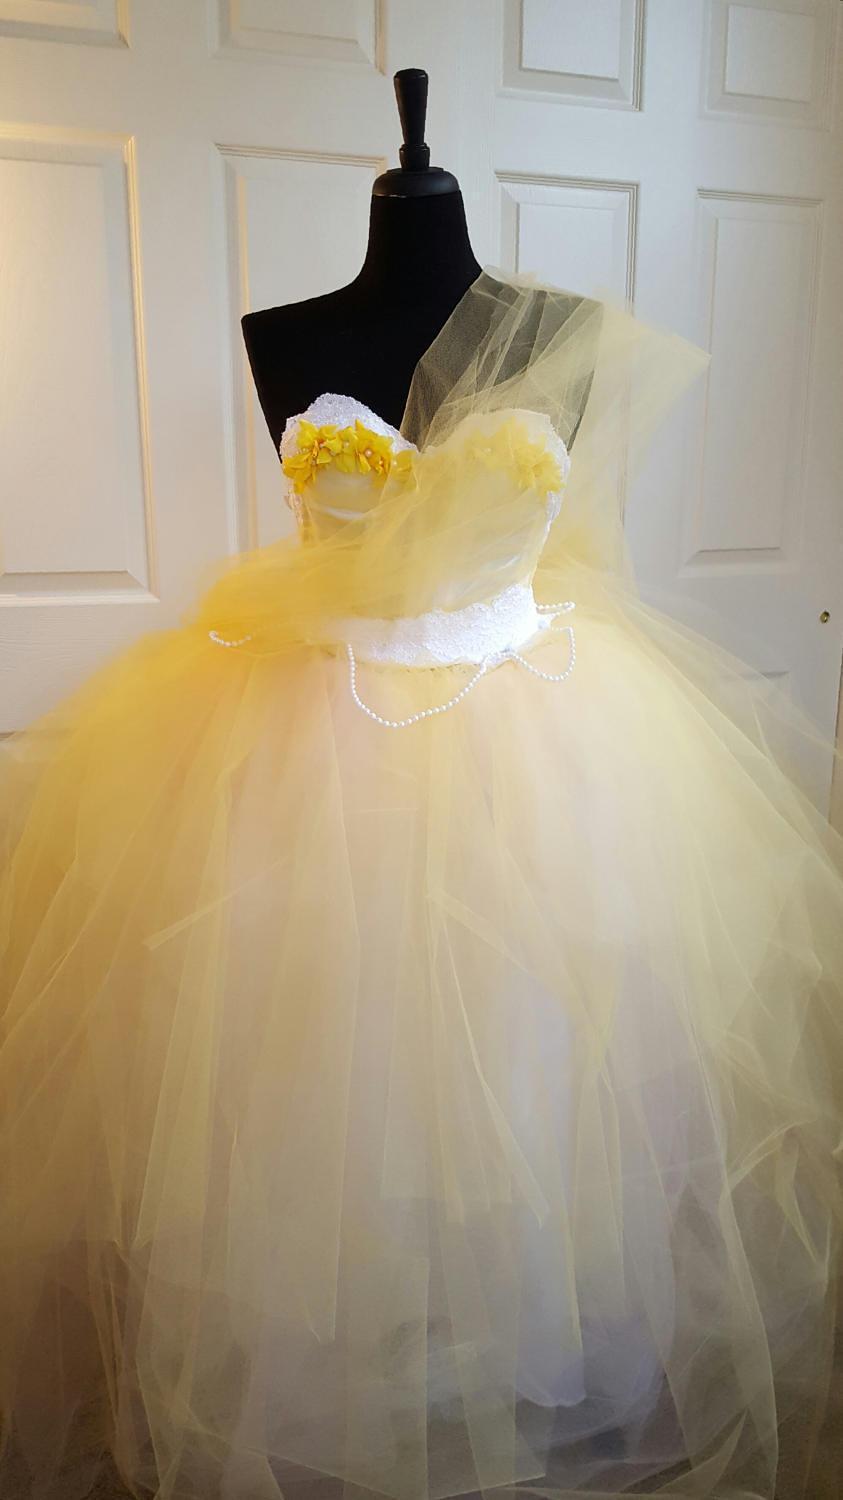 Mariage - Sample Gown / Yellow And White Lace Tulle Corset Lehenga Saree Sari Bridal Wedding Ball Gown Party Costume Quinceanera Prom